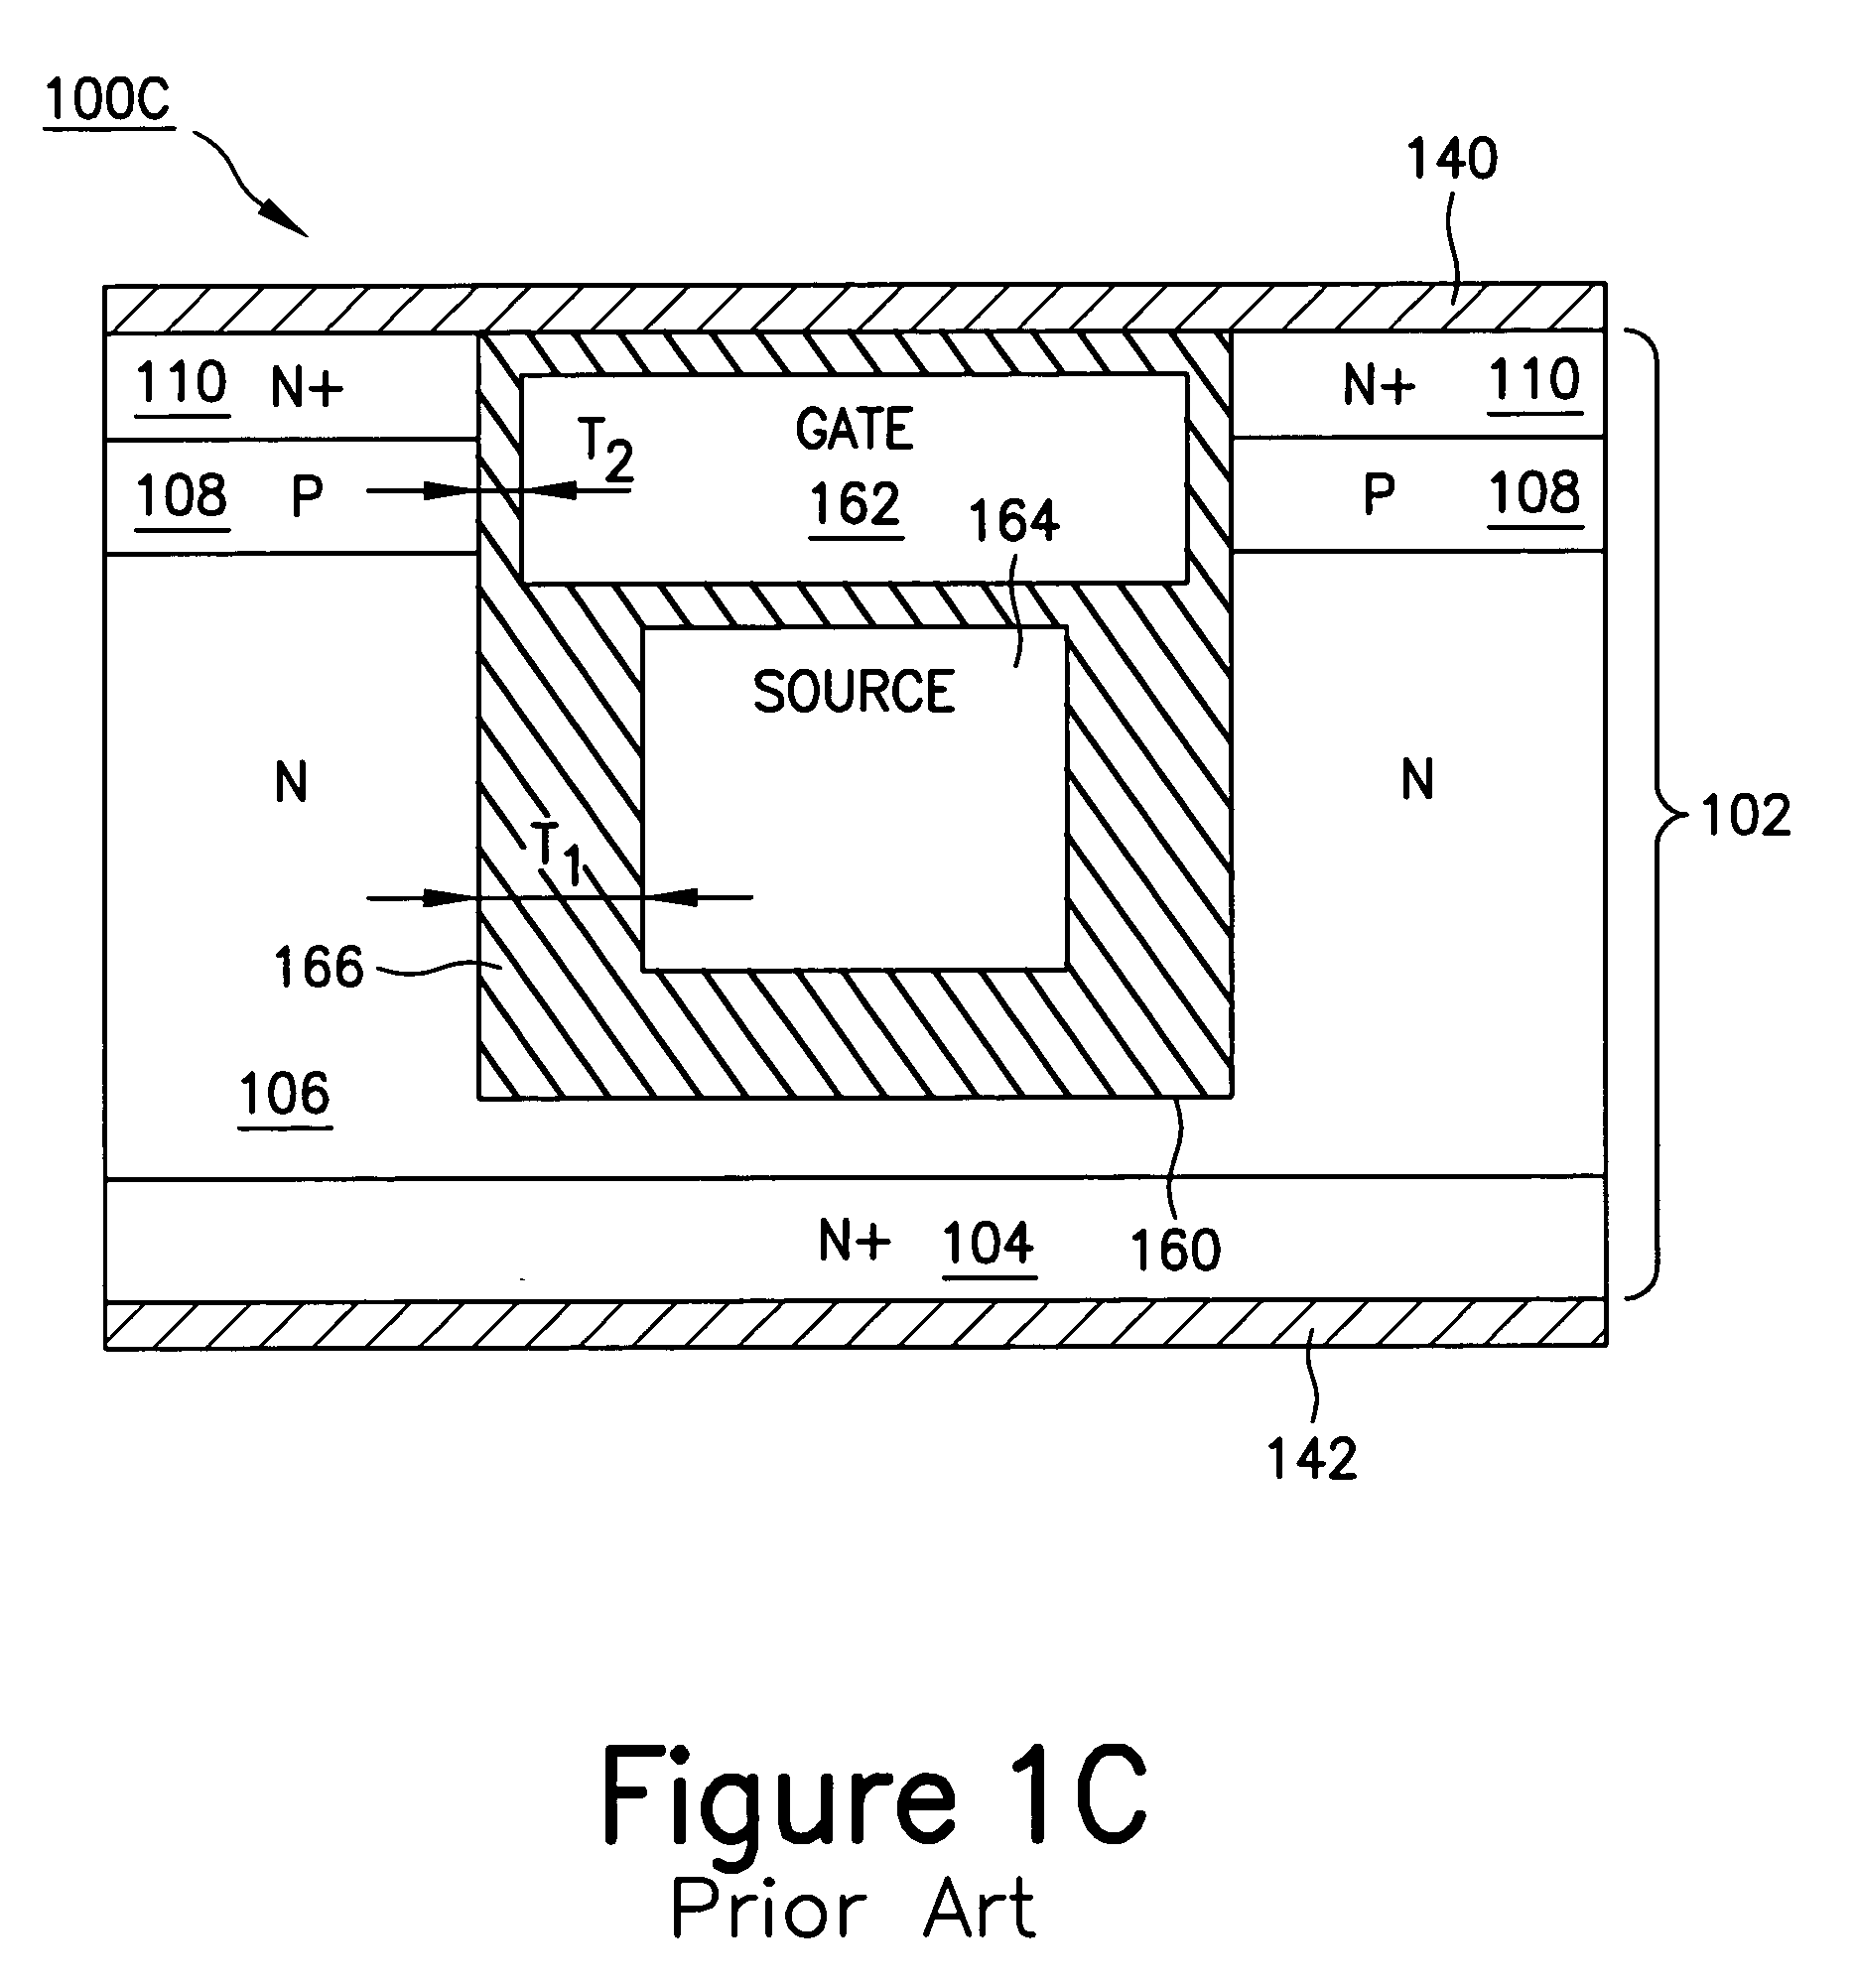 Power devices having trench-based source and gate electrodes